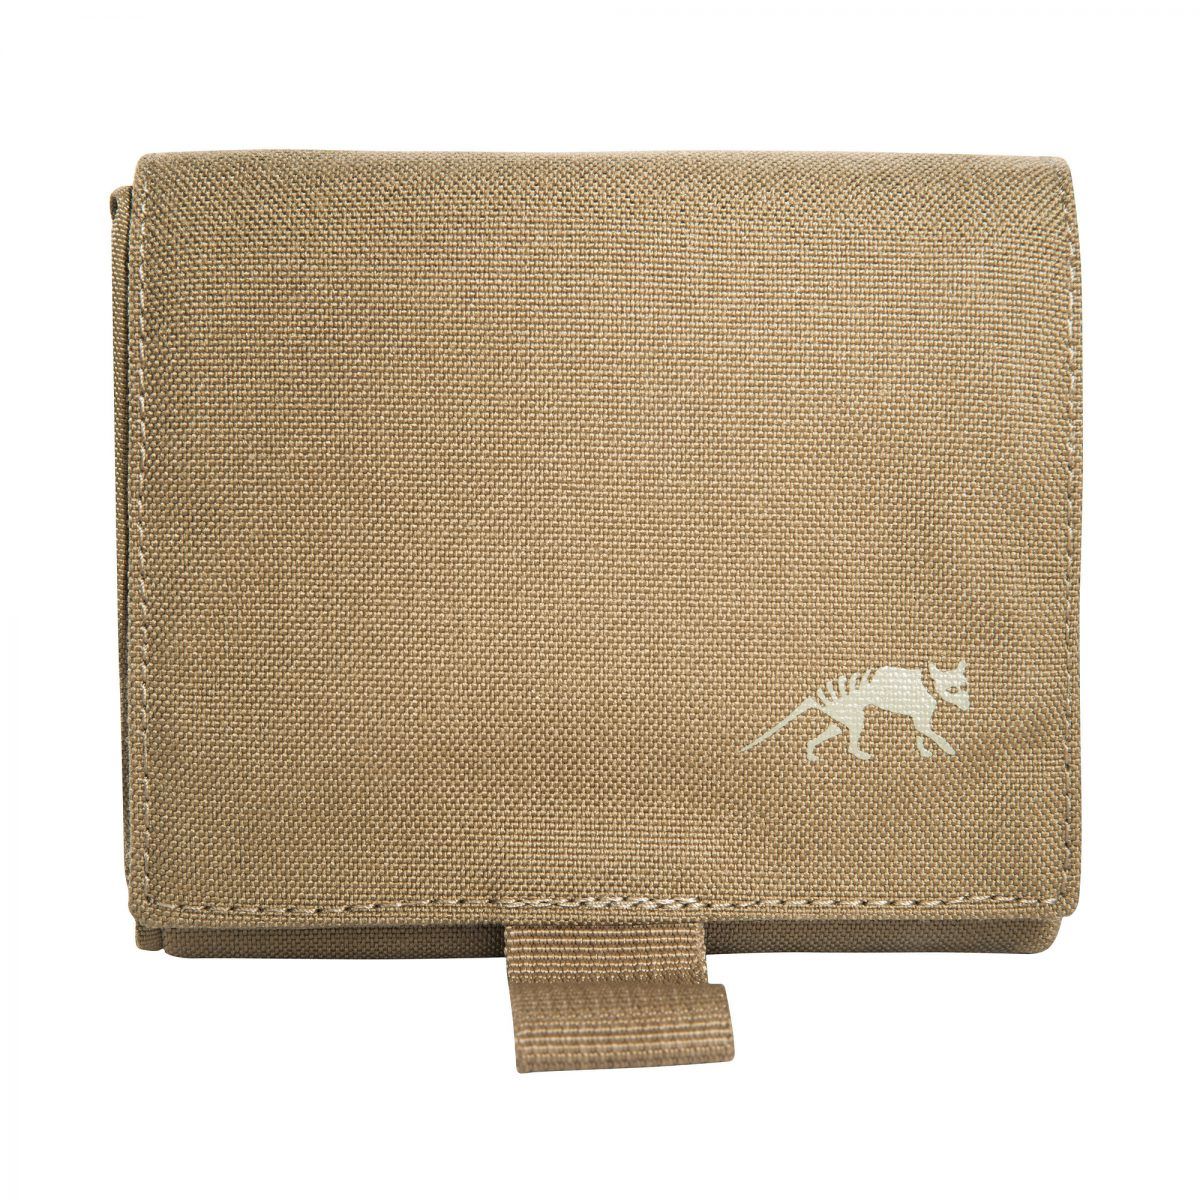 Tasmanian Tiger - Dump Pouch MKII - Coyote Brown